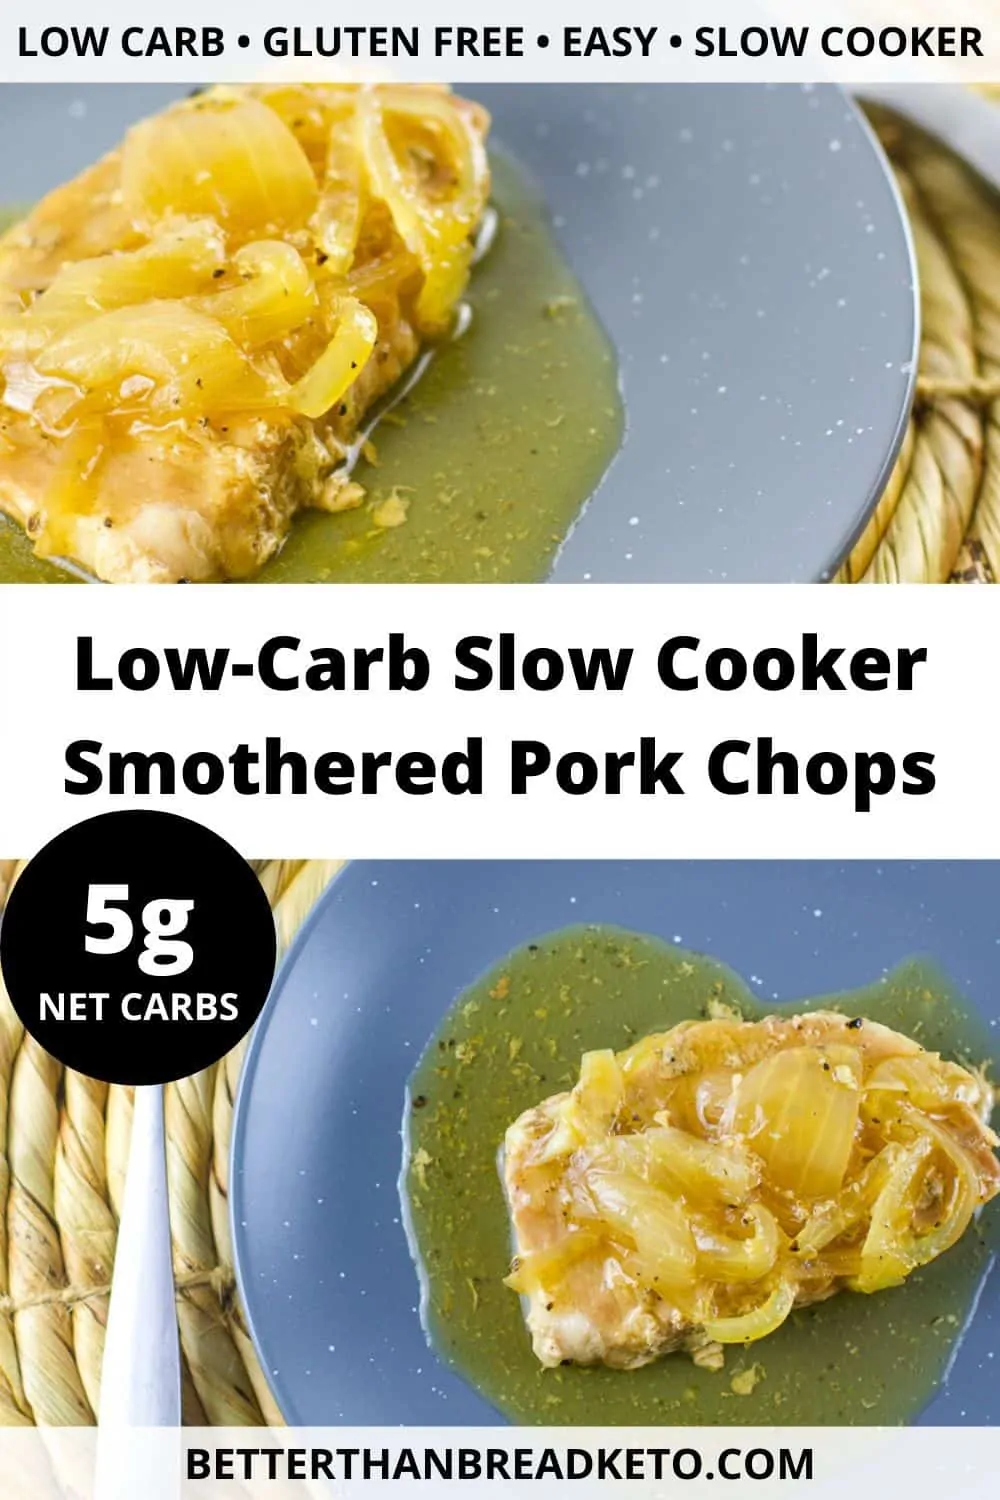 Low-Carb Slow Cooker Smothered Pork Chops